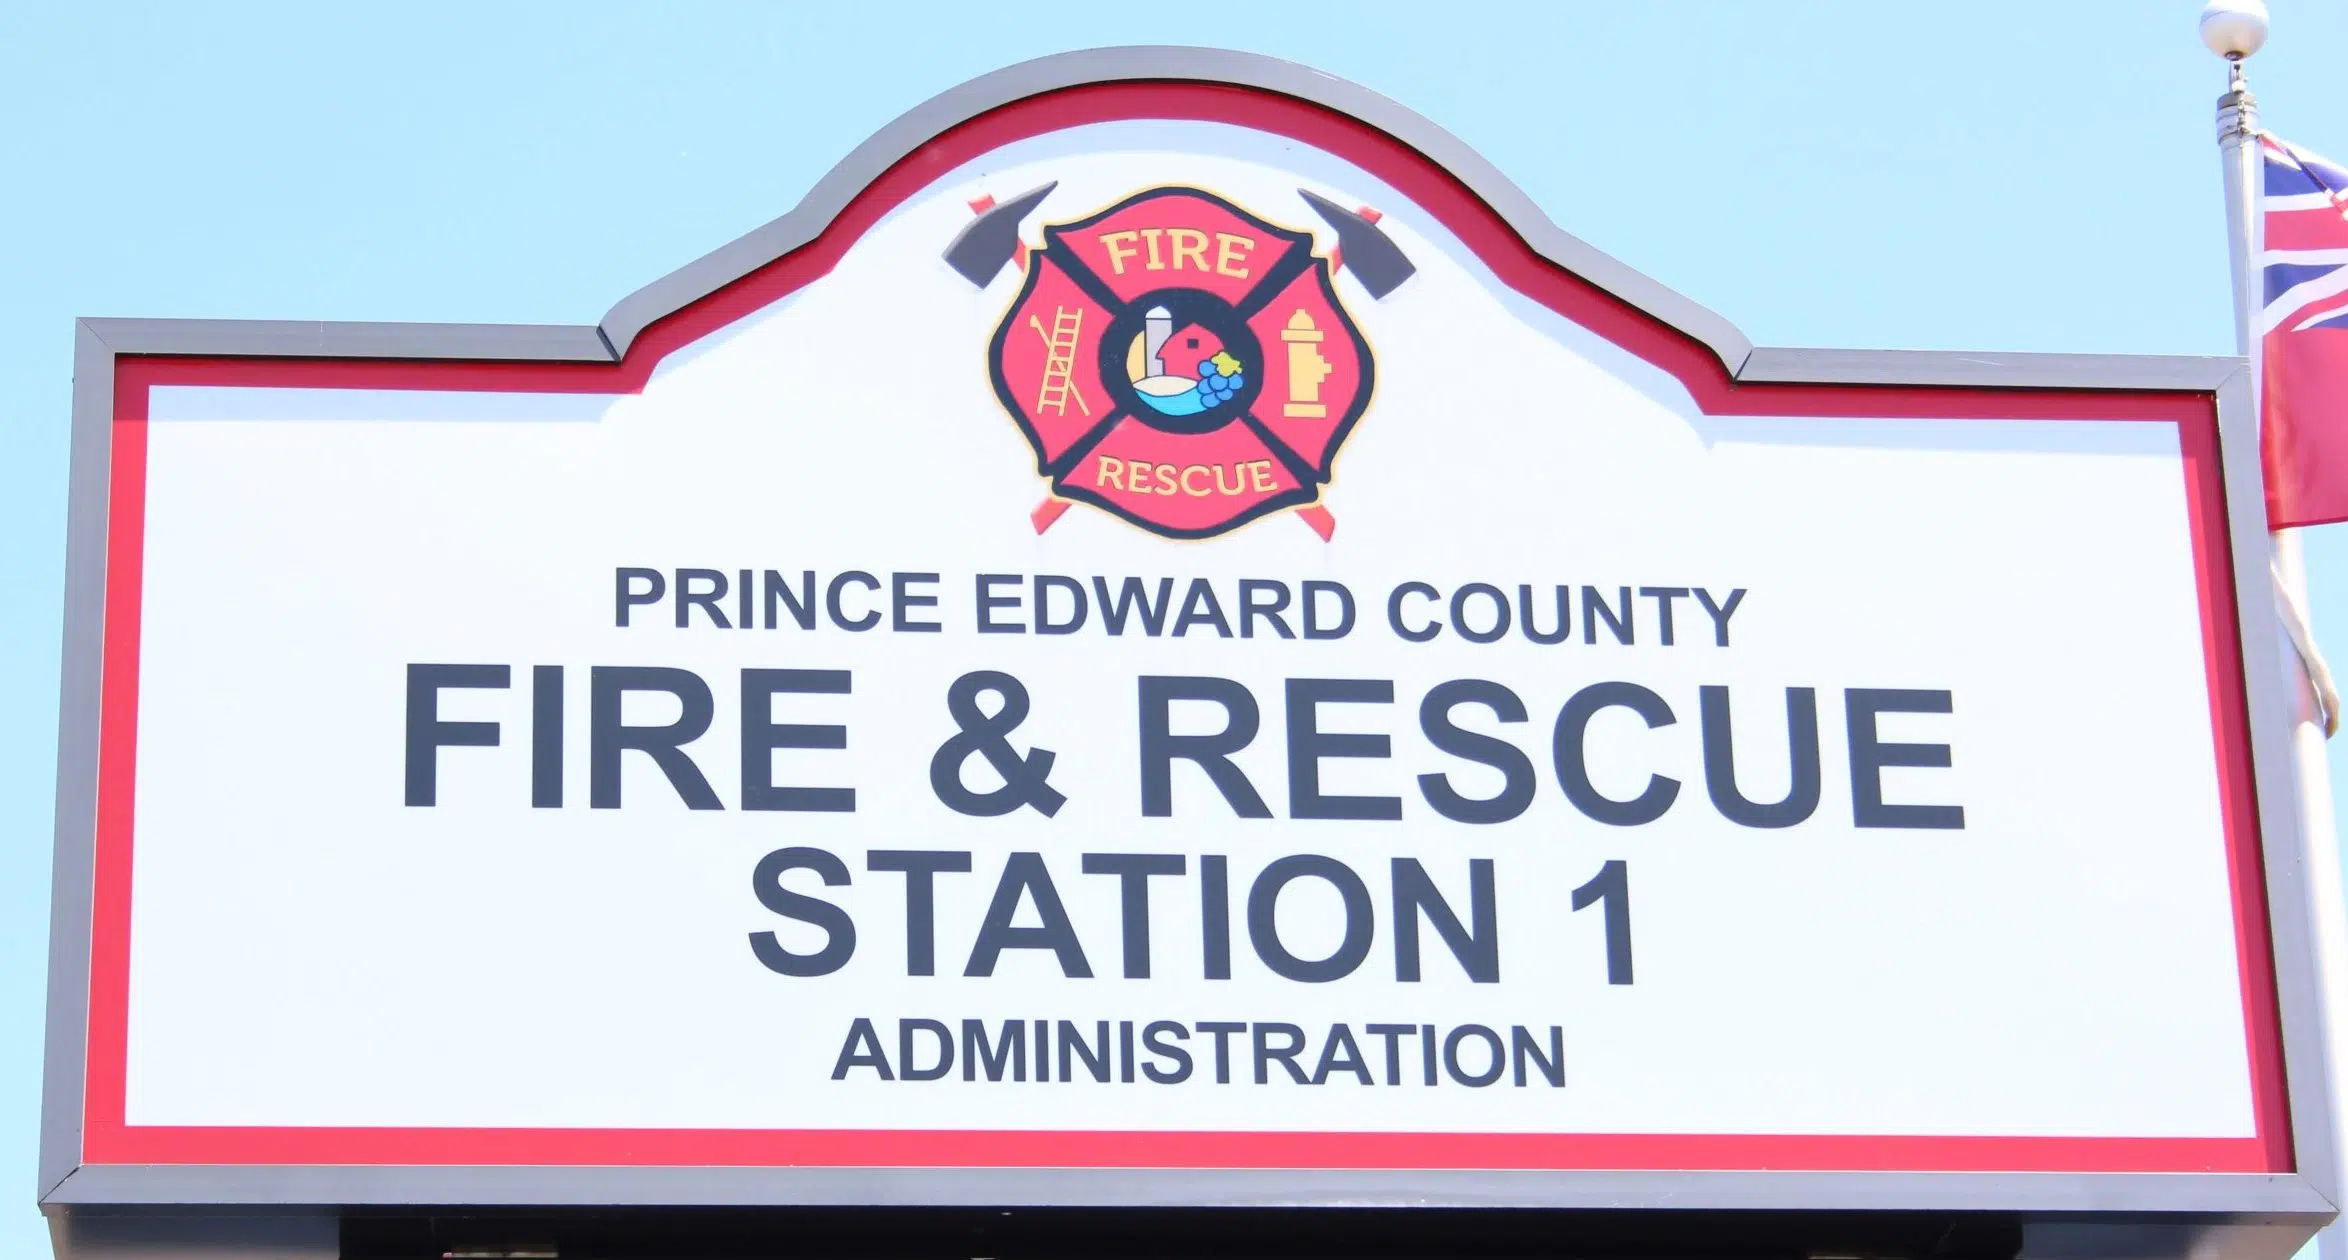 County staff recommending adding firefighters to mandatory COVID-19 vaccination list